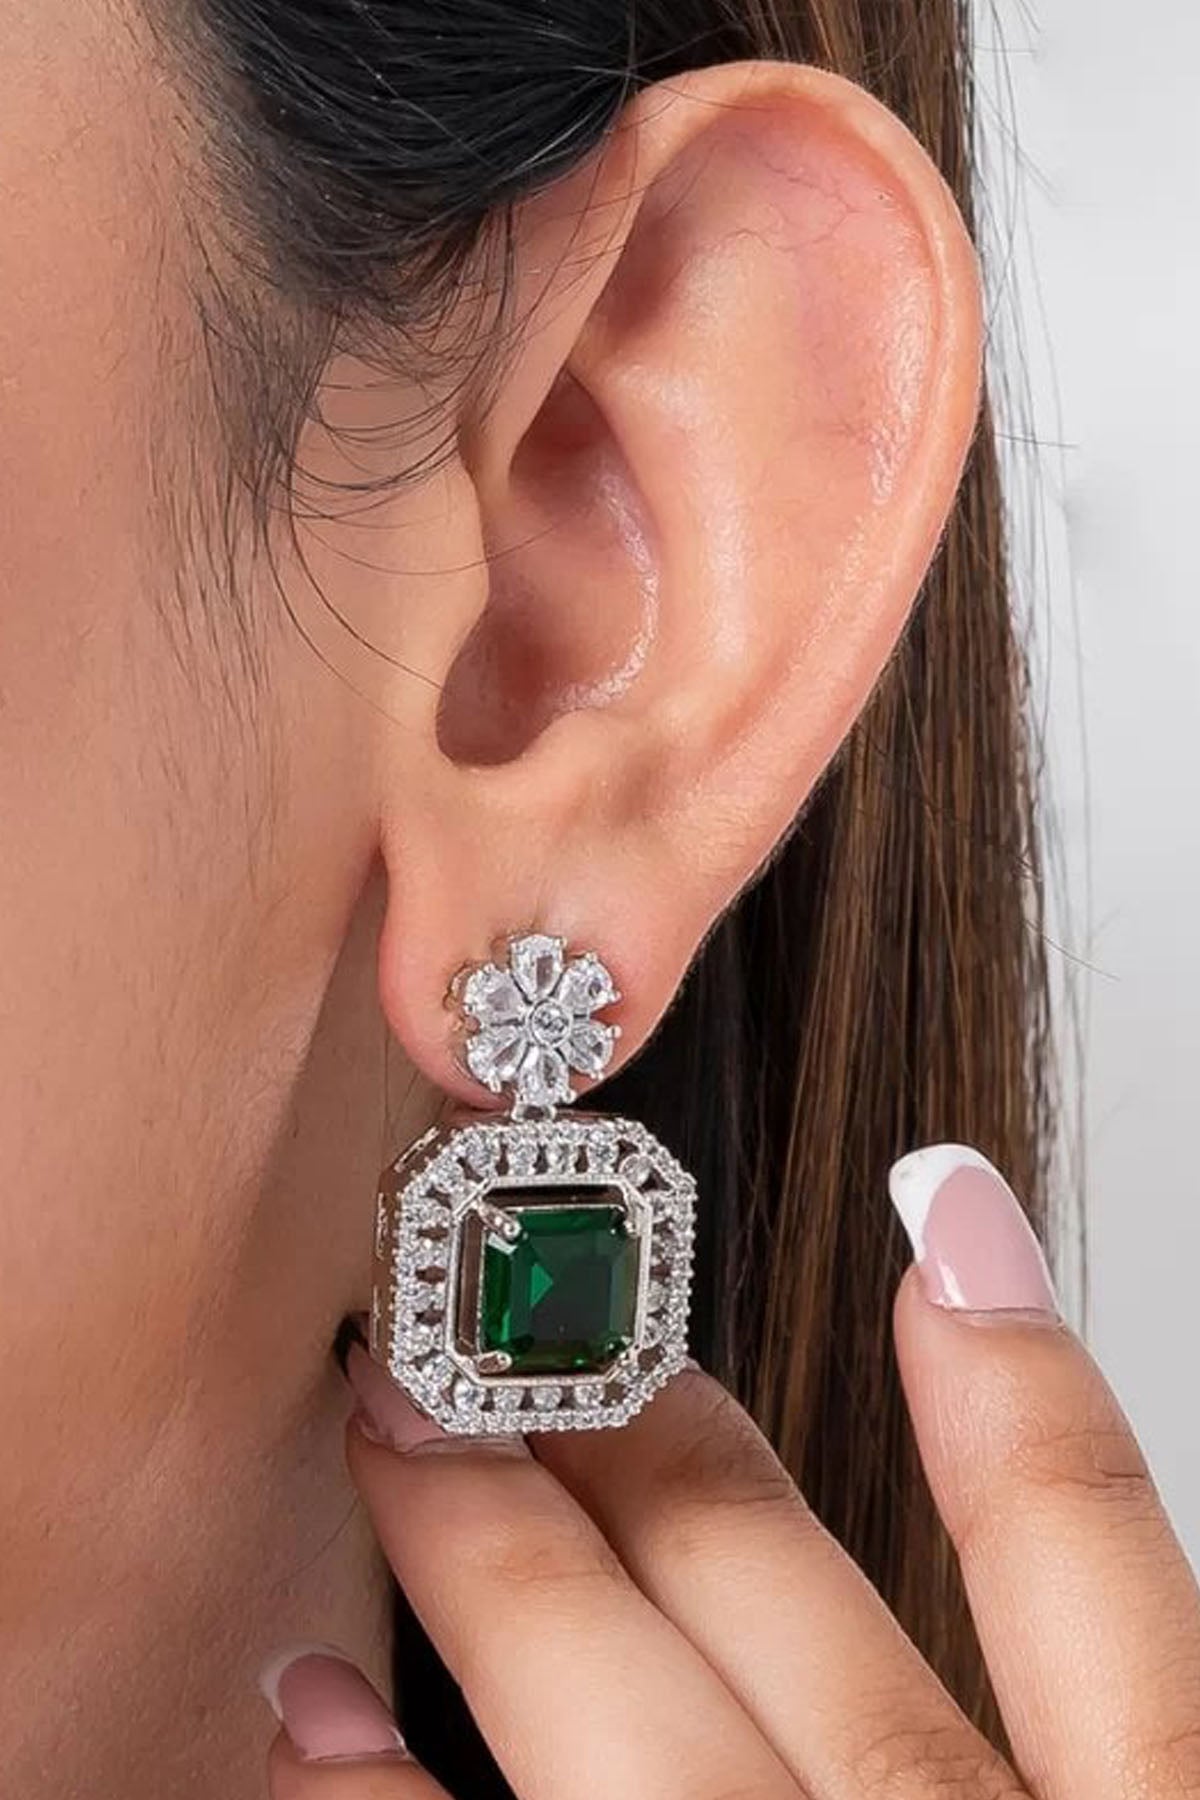 Emerald Diamond Drop Earrings of Brand Putstyle Available online at ScrollnShops